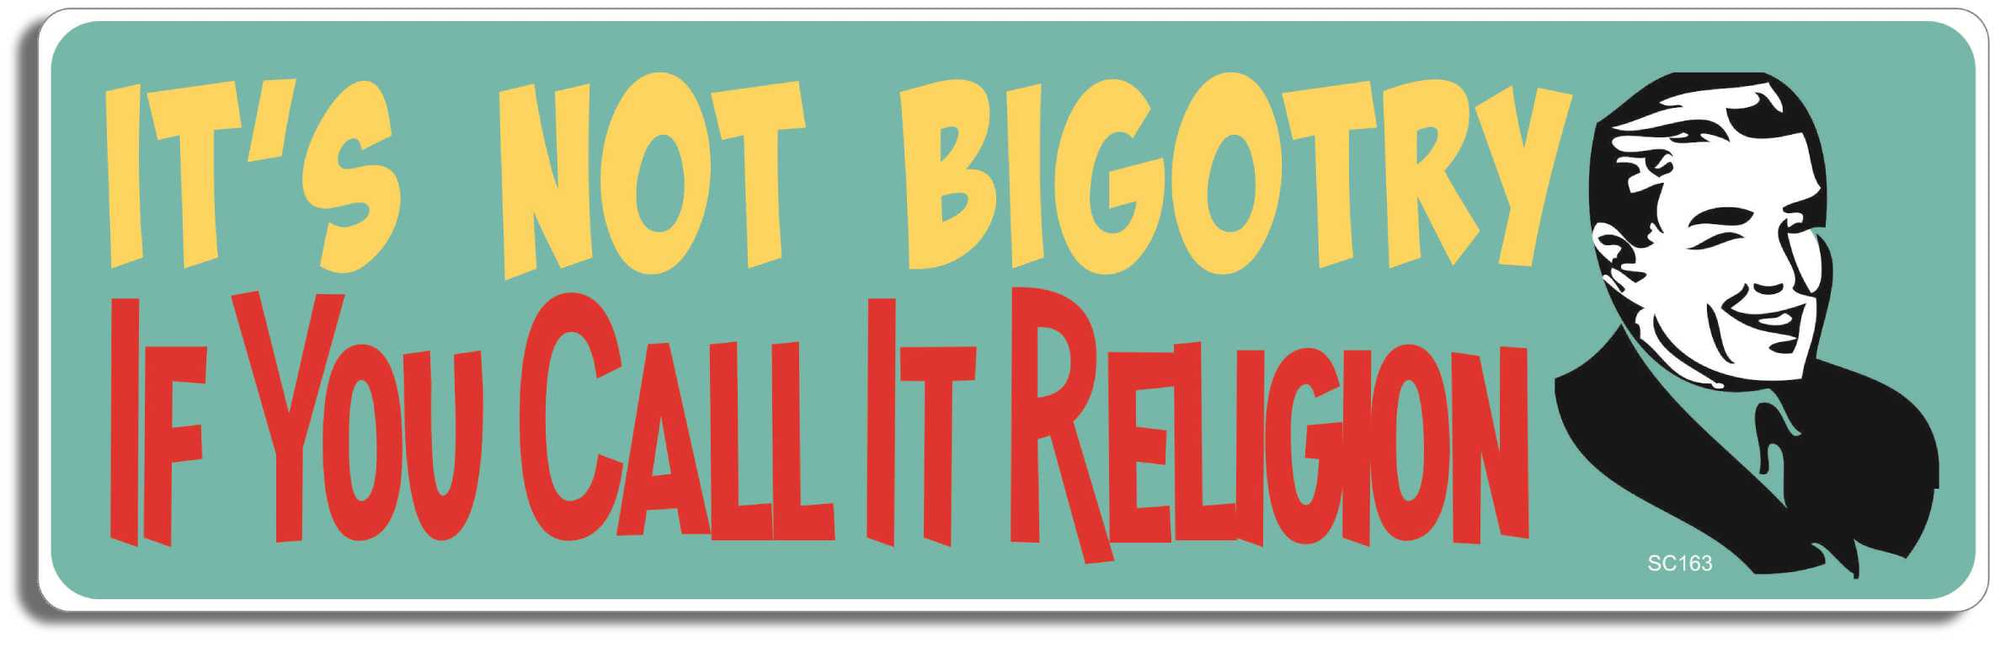 It's not bigotry if you call it religion - 3" x 10" -  Decal Bumper Sticker-political Bumper Sticker Car Magnet It's not bigotry if you call it religion  Decal for carsconservative, liberal, Political